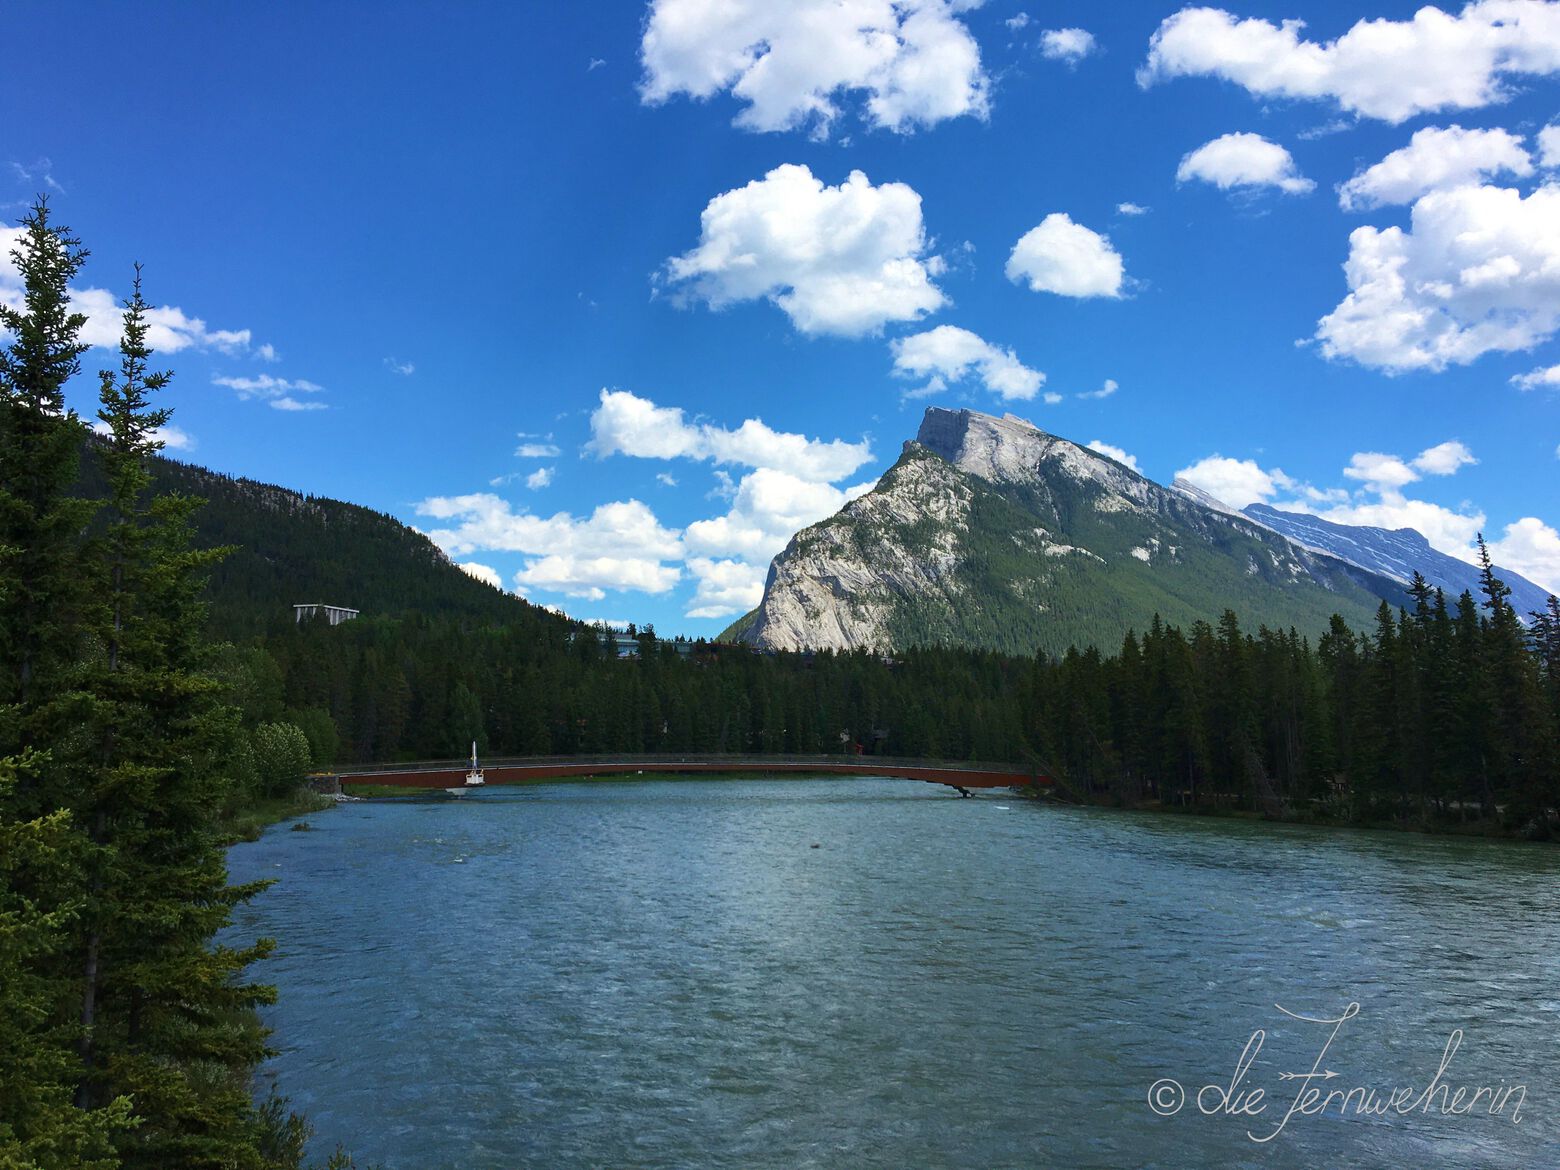 The Bow River Pedestrian Bridge in the town of Banff (with Rundle Mountain in the background).